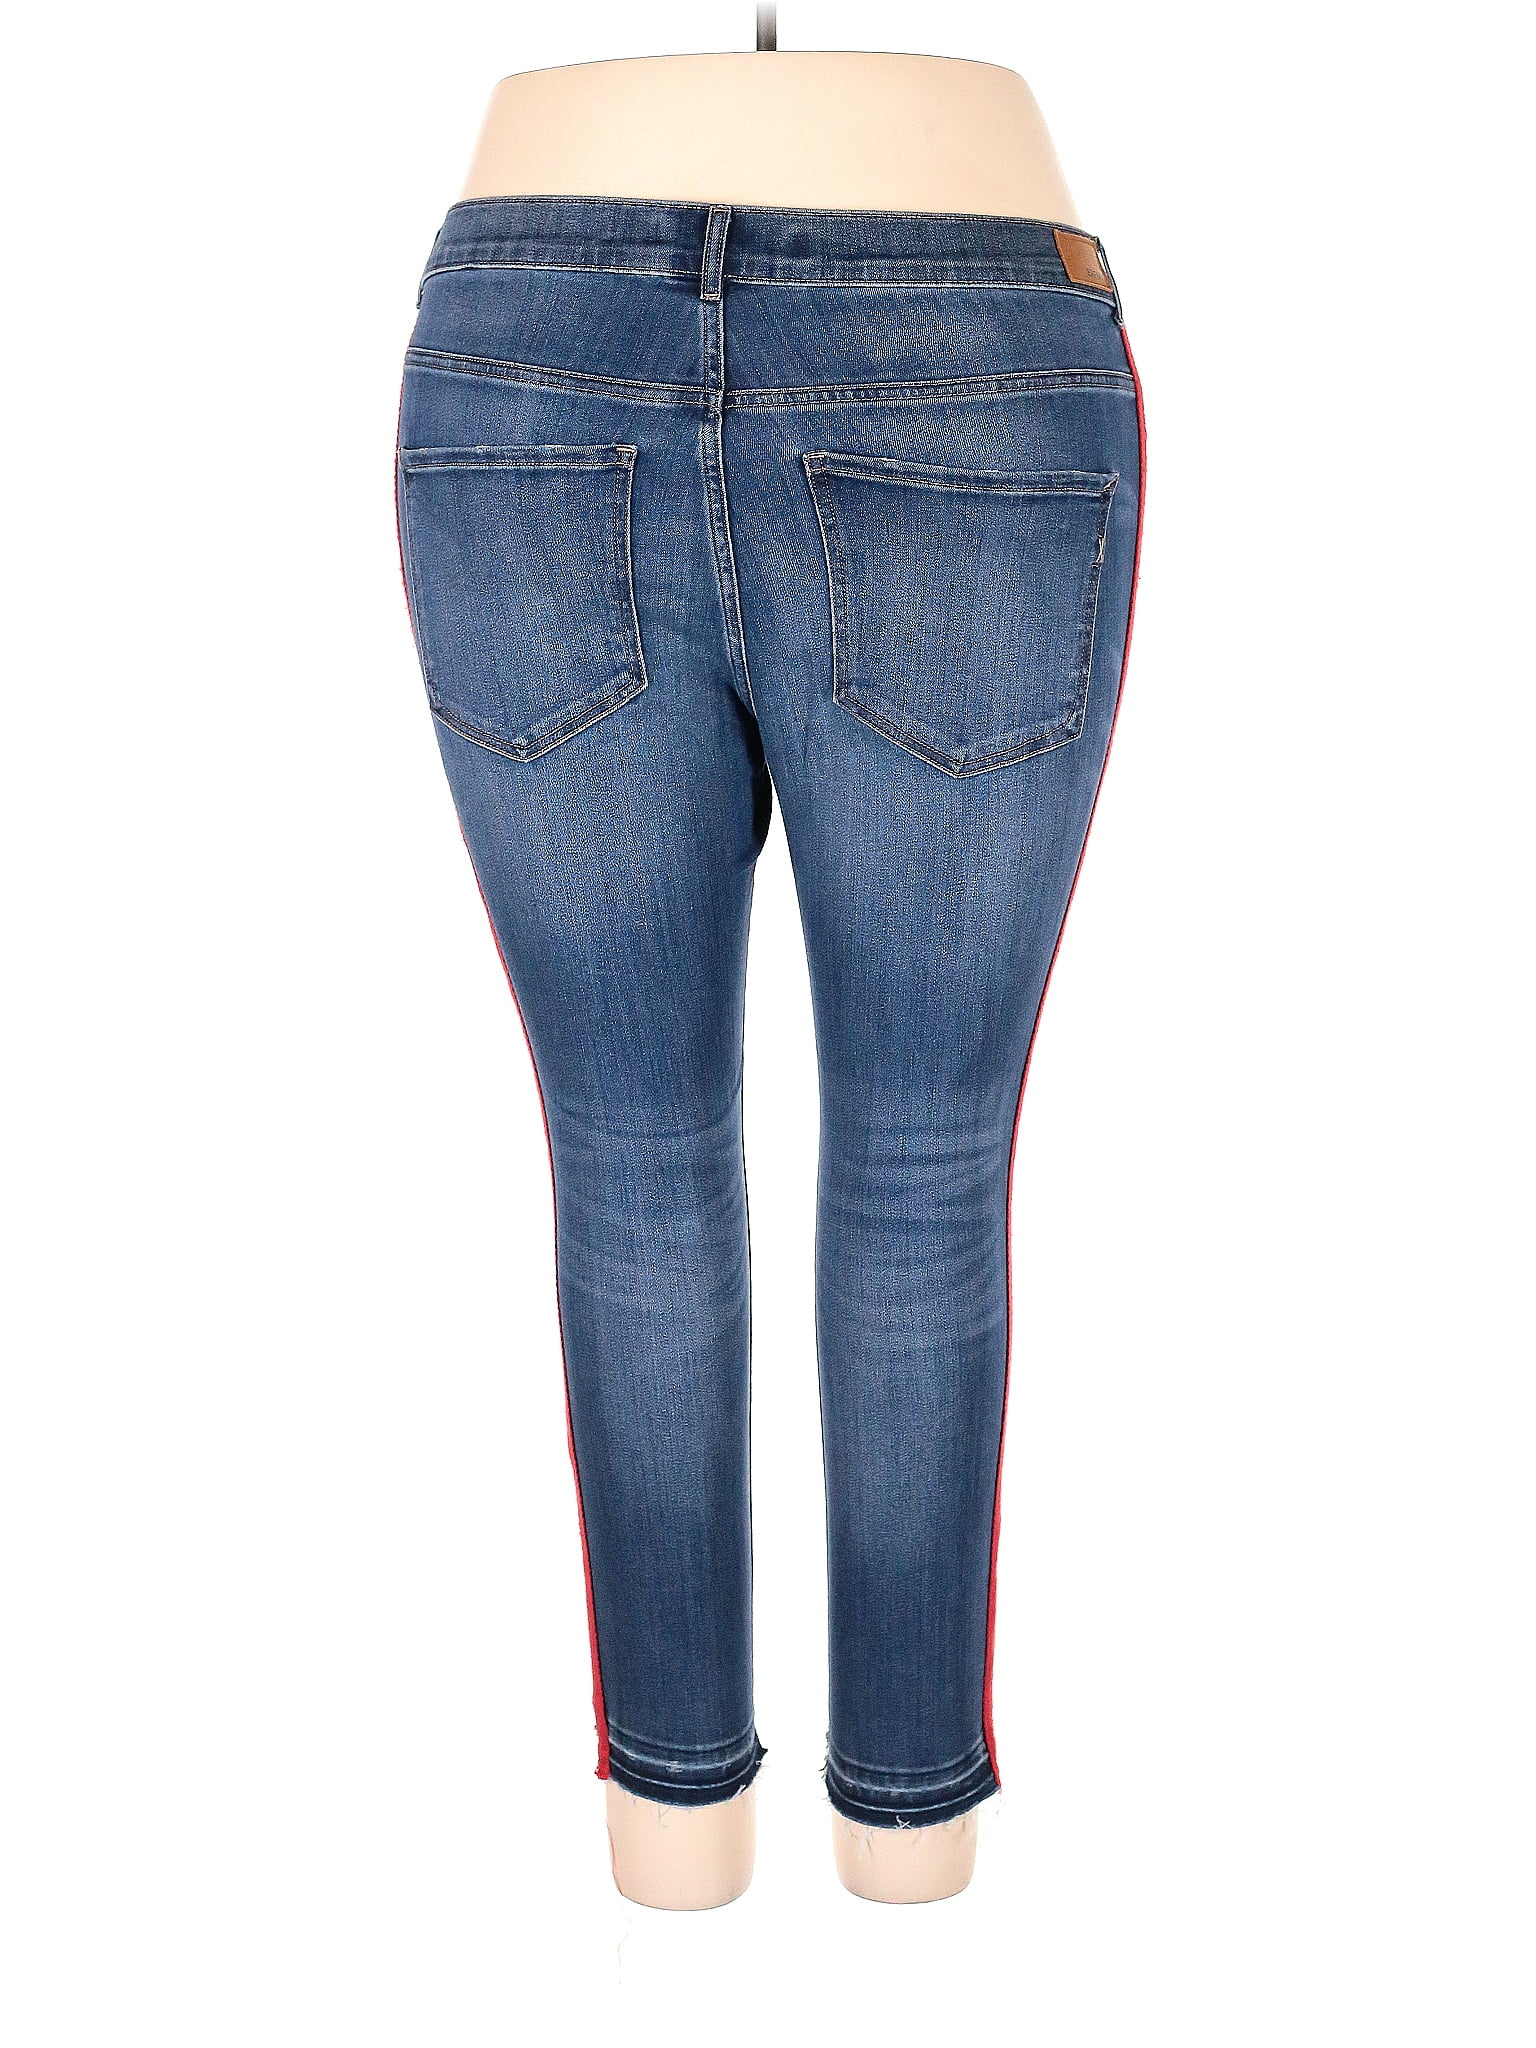 Express Solid Blue Jeans Size 18 (Plus) - 63% off